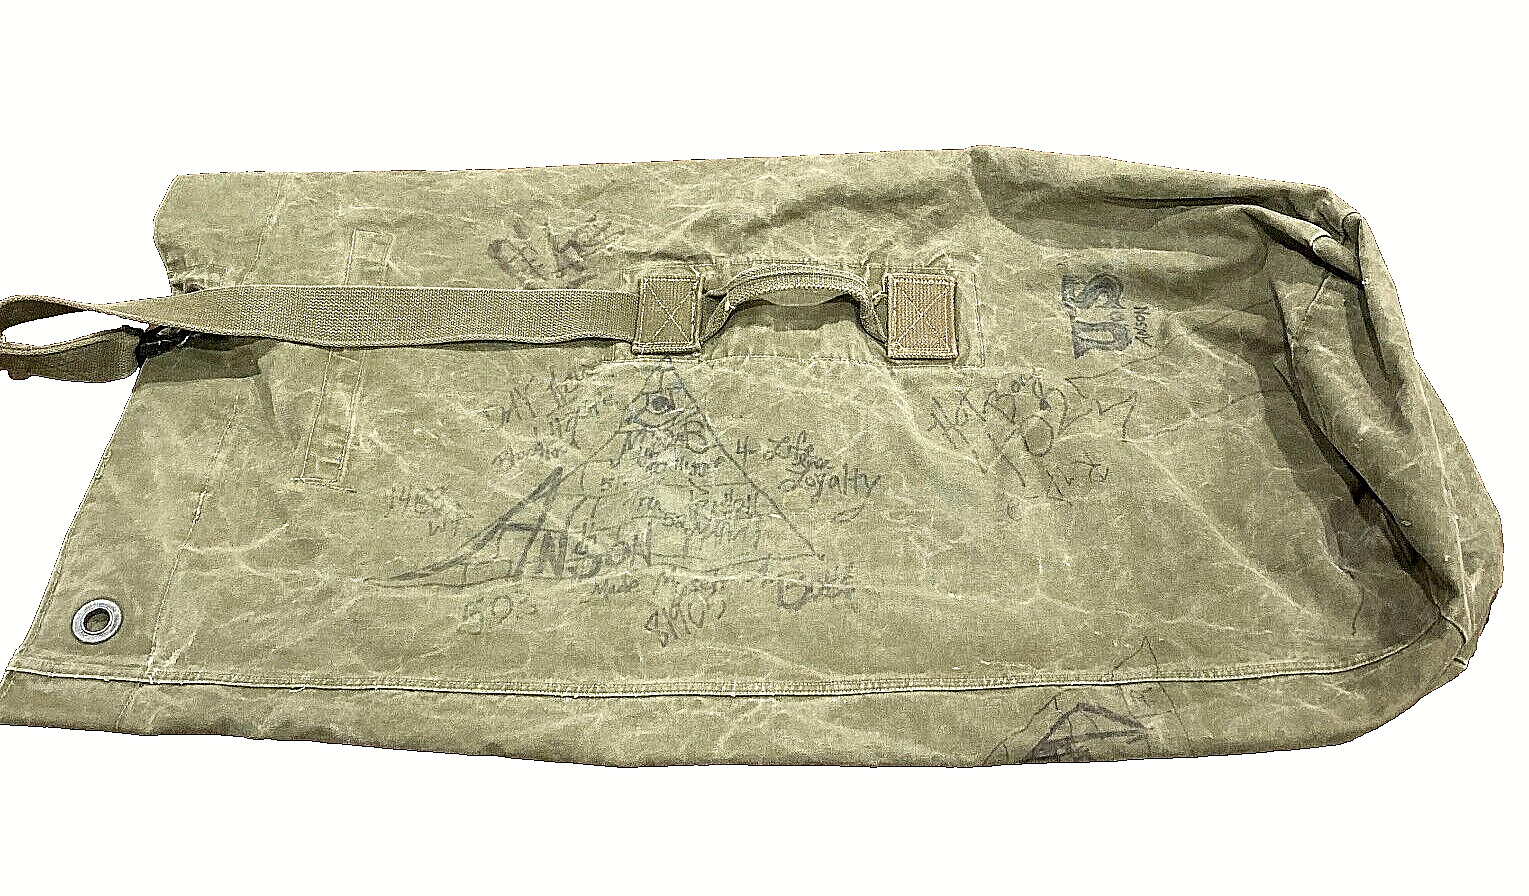 Unique Vintage US Army Duffel Bag Soldier Deployment with Trench Art